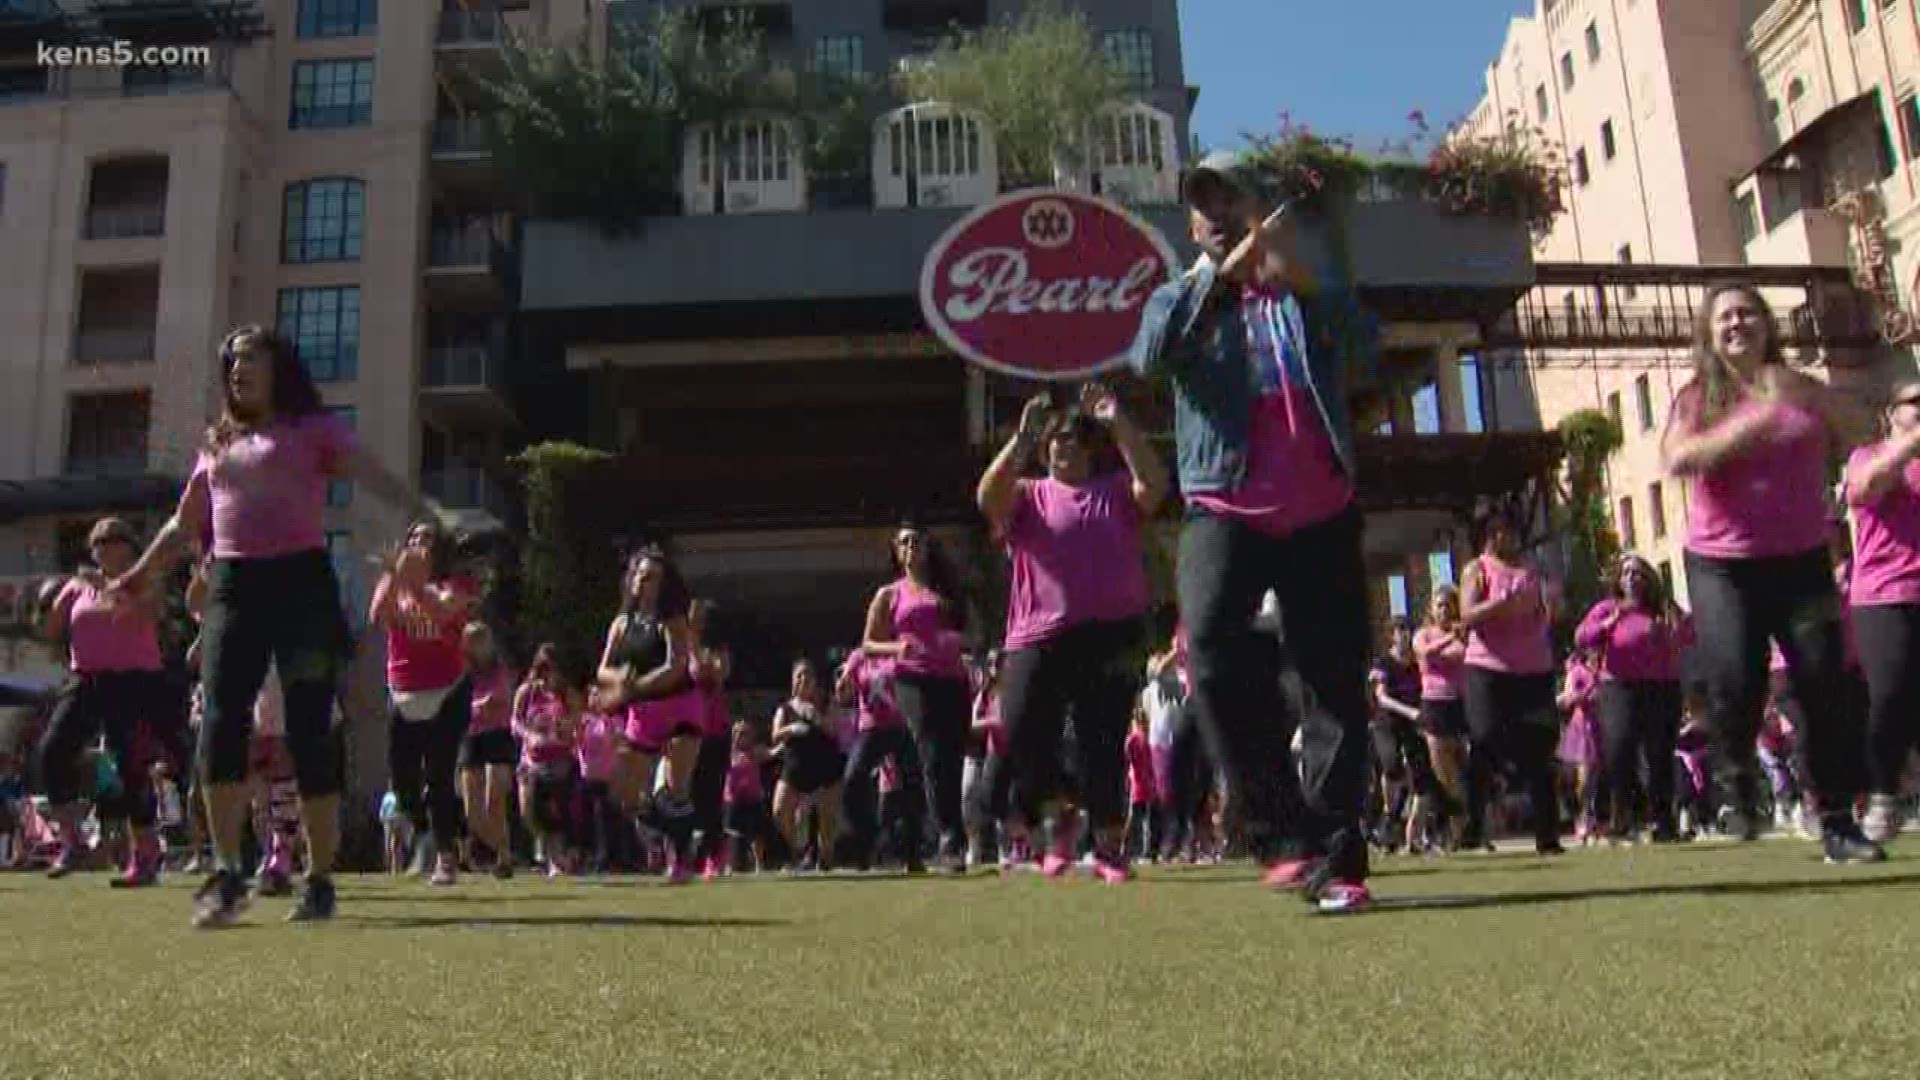 It was all part of the Thrivewell Cancer Foundation's Pink Flash Mob. They do it every year to raise awareness of breast cancer.